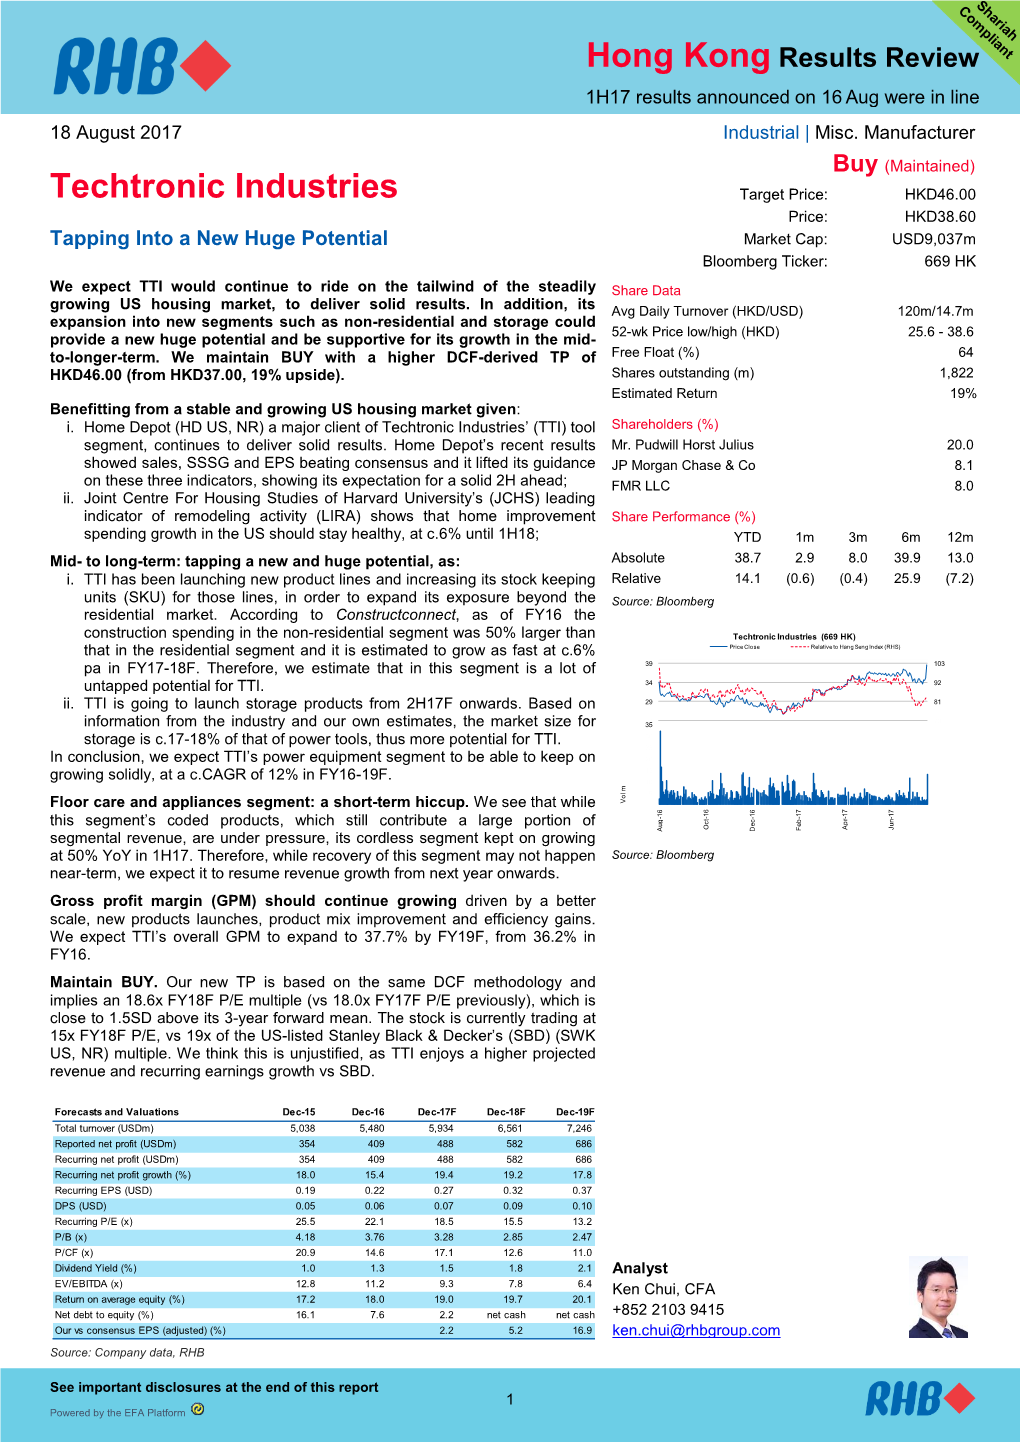 Techtronic Industries Target Price: HKD46.00 Price: HKD38.60 Tapping Into a New Huge Potential Market Cap: USD9,037M Bloomberg Ticker: 669 HK